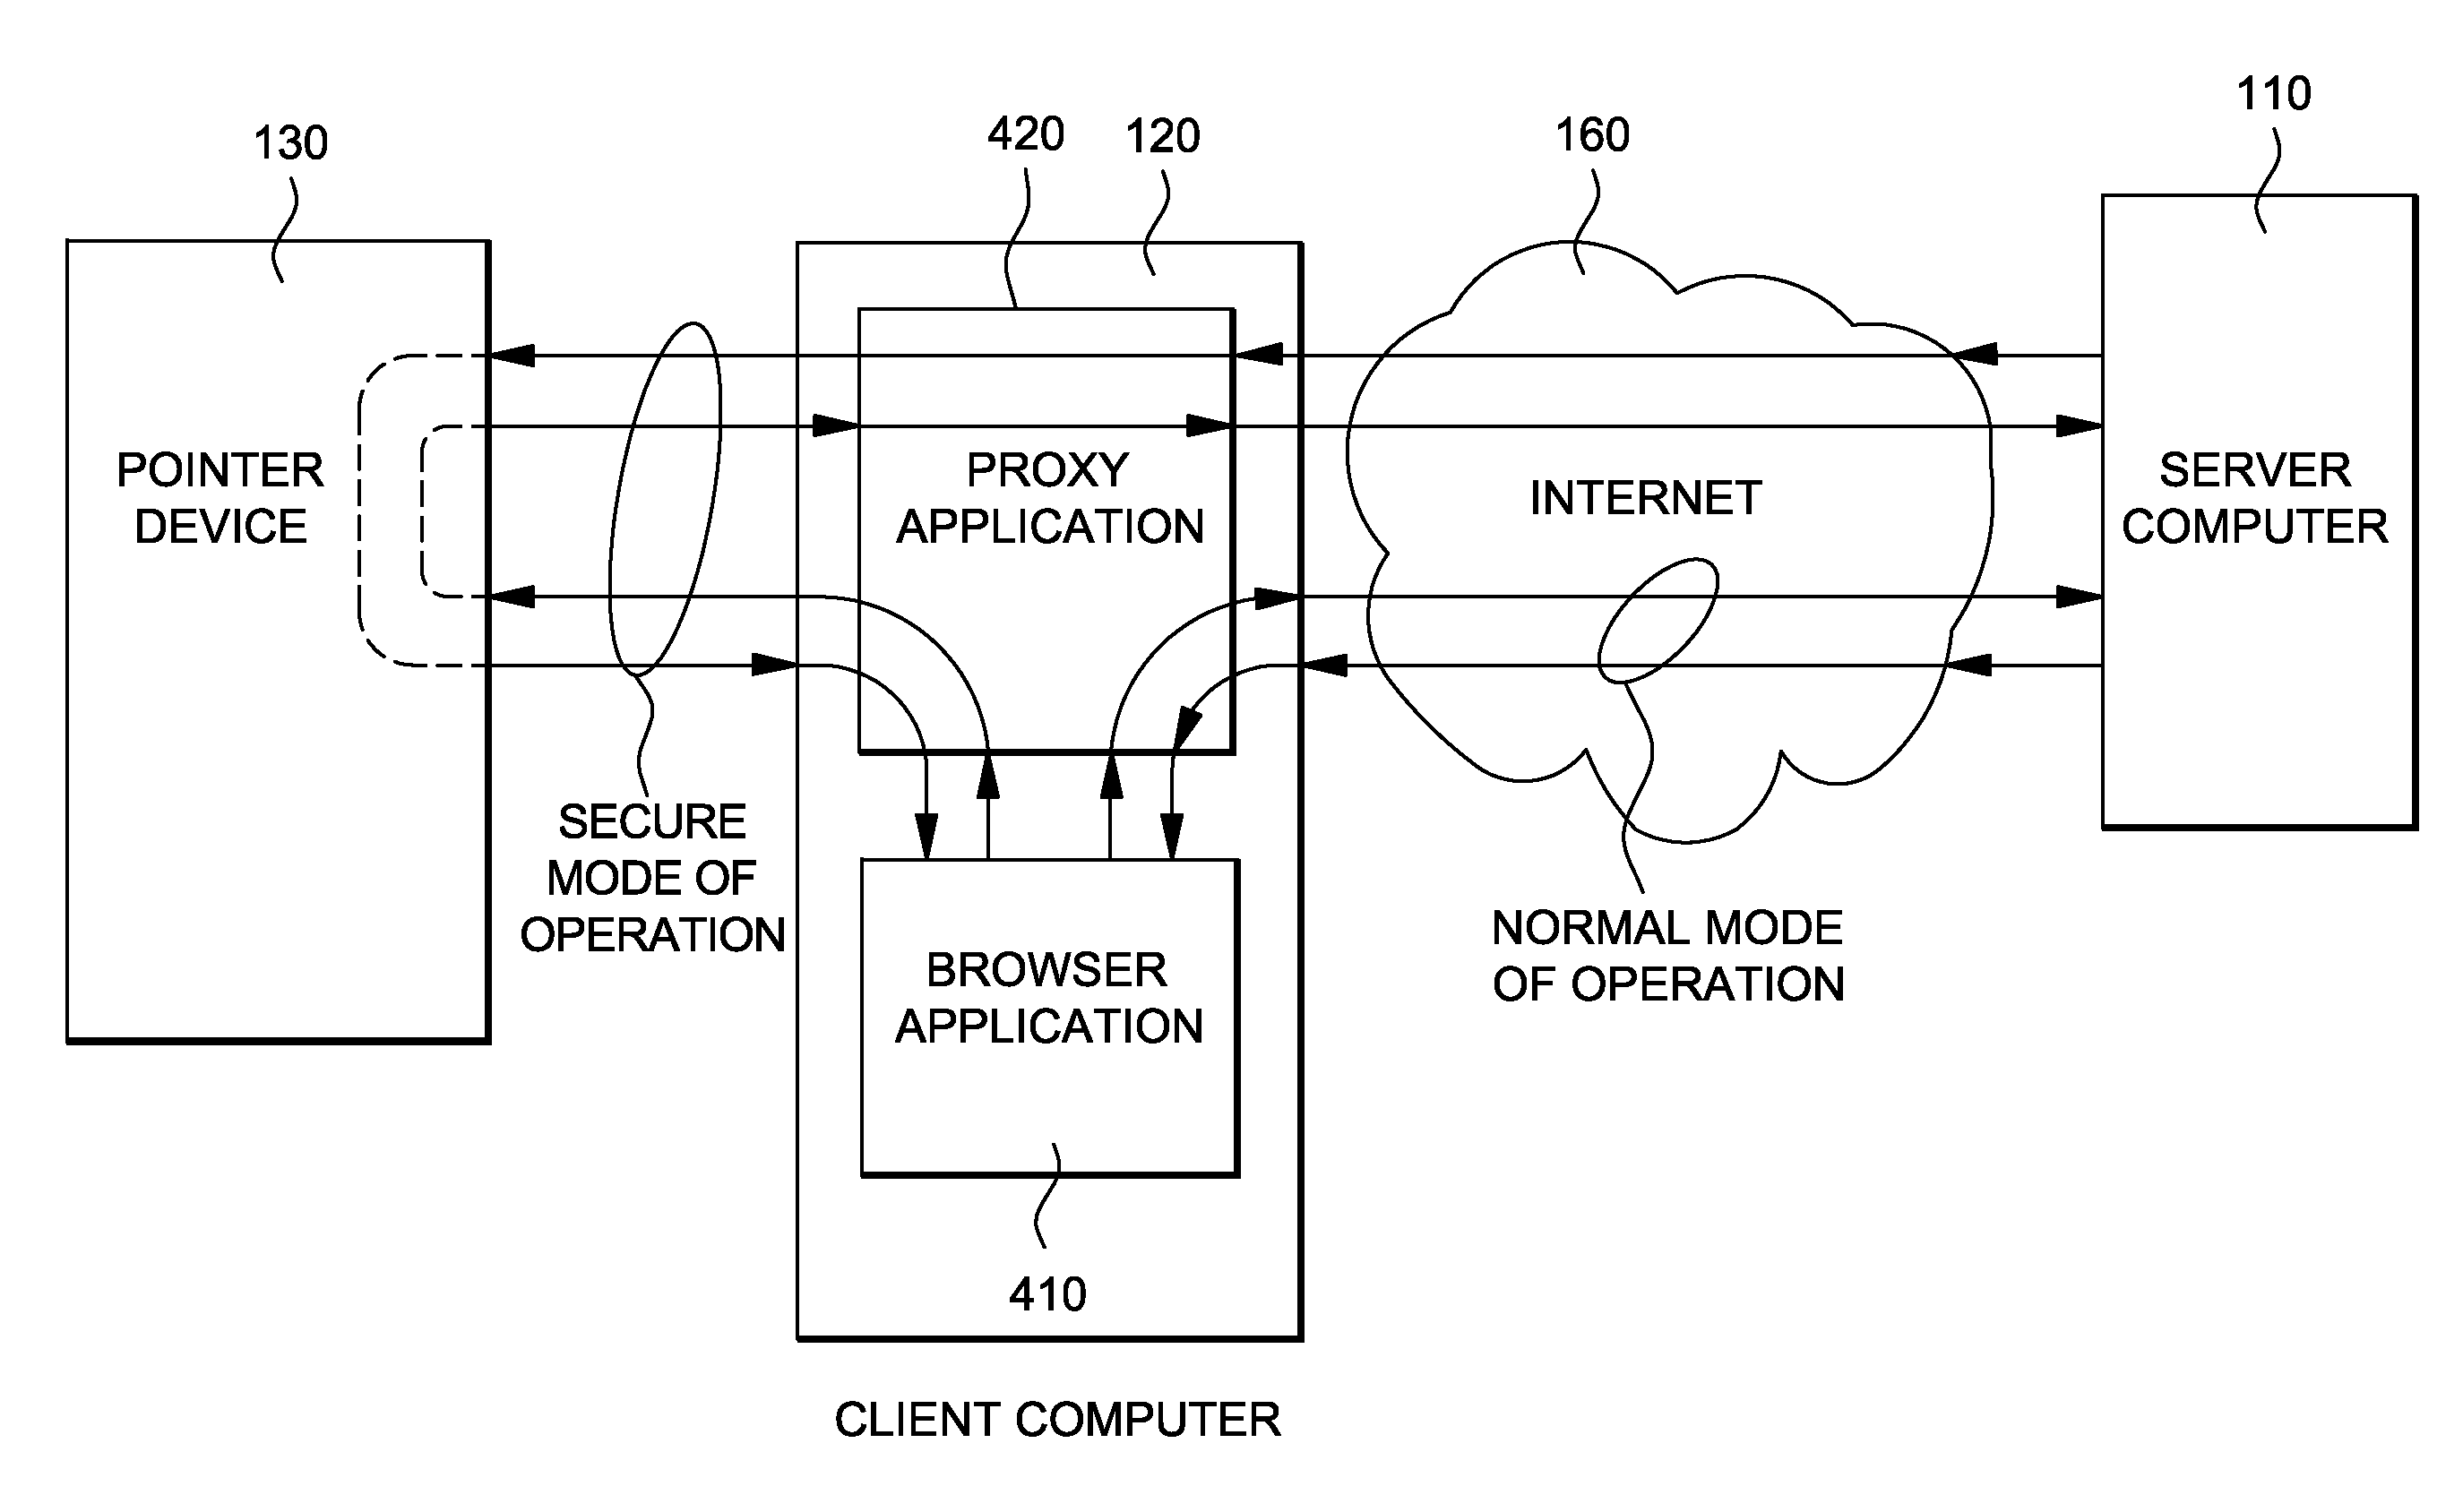 System and method of performing electronic transactions